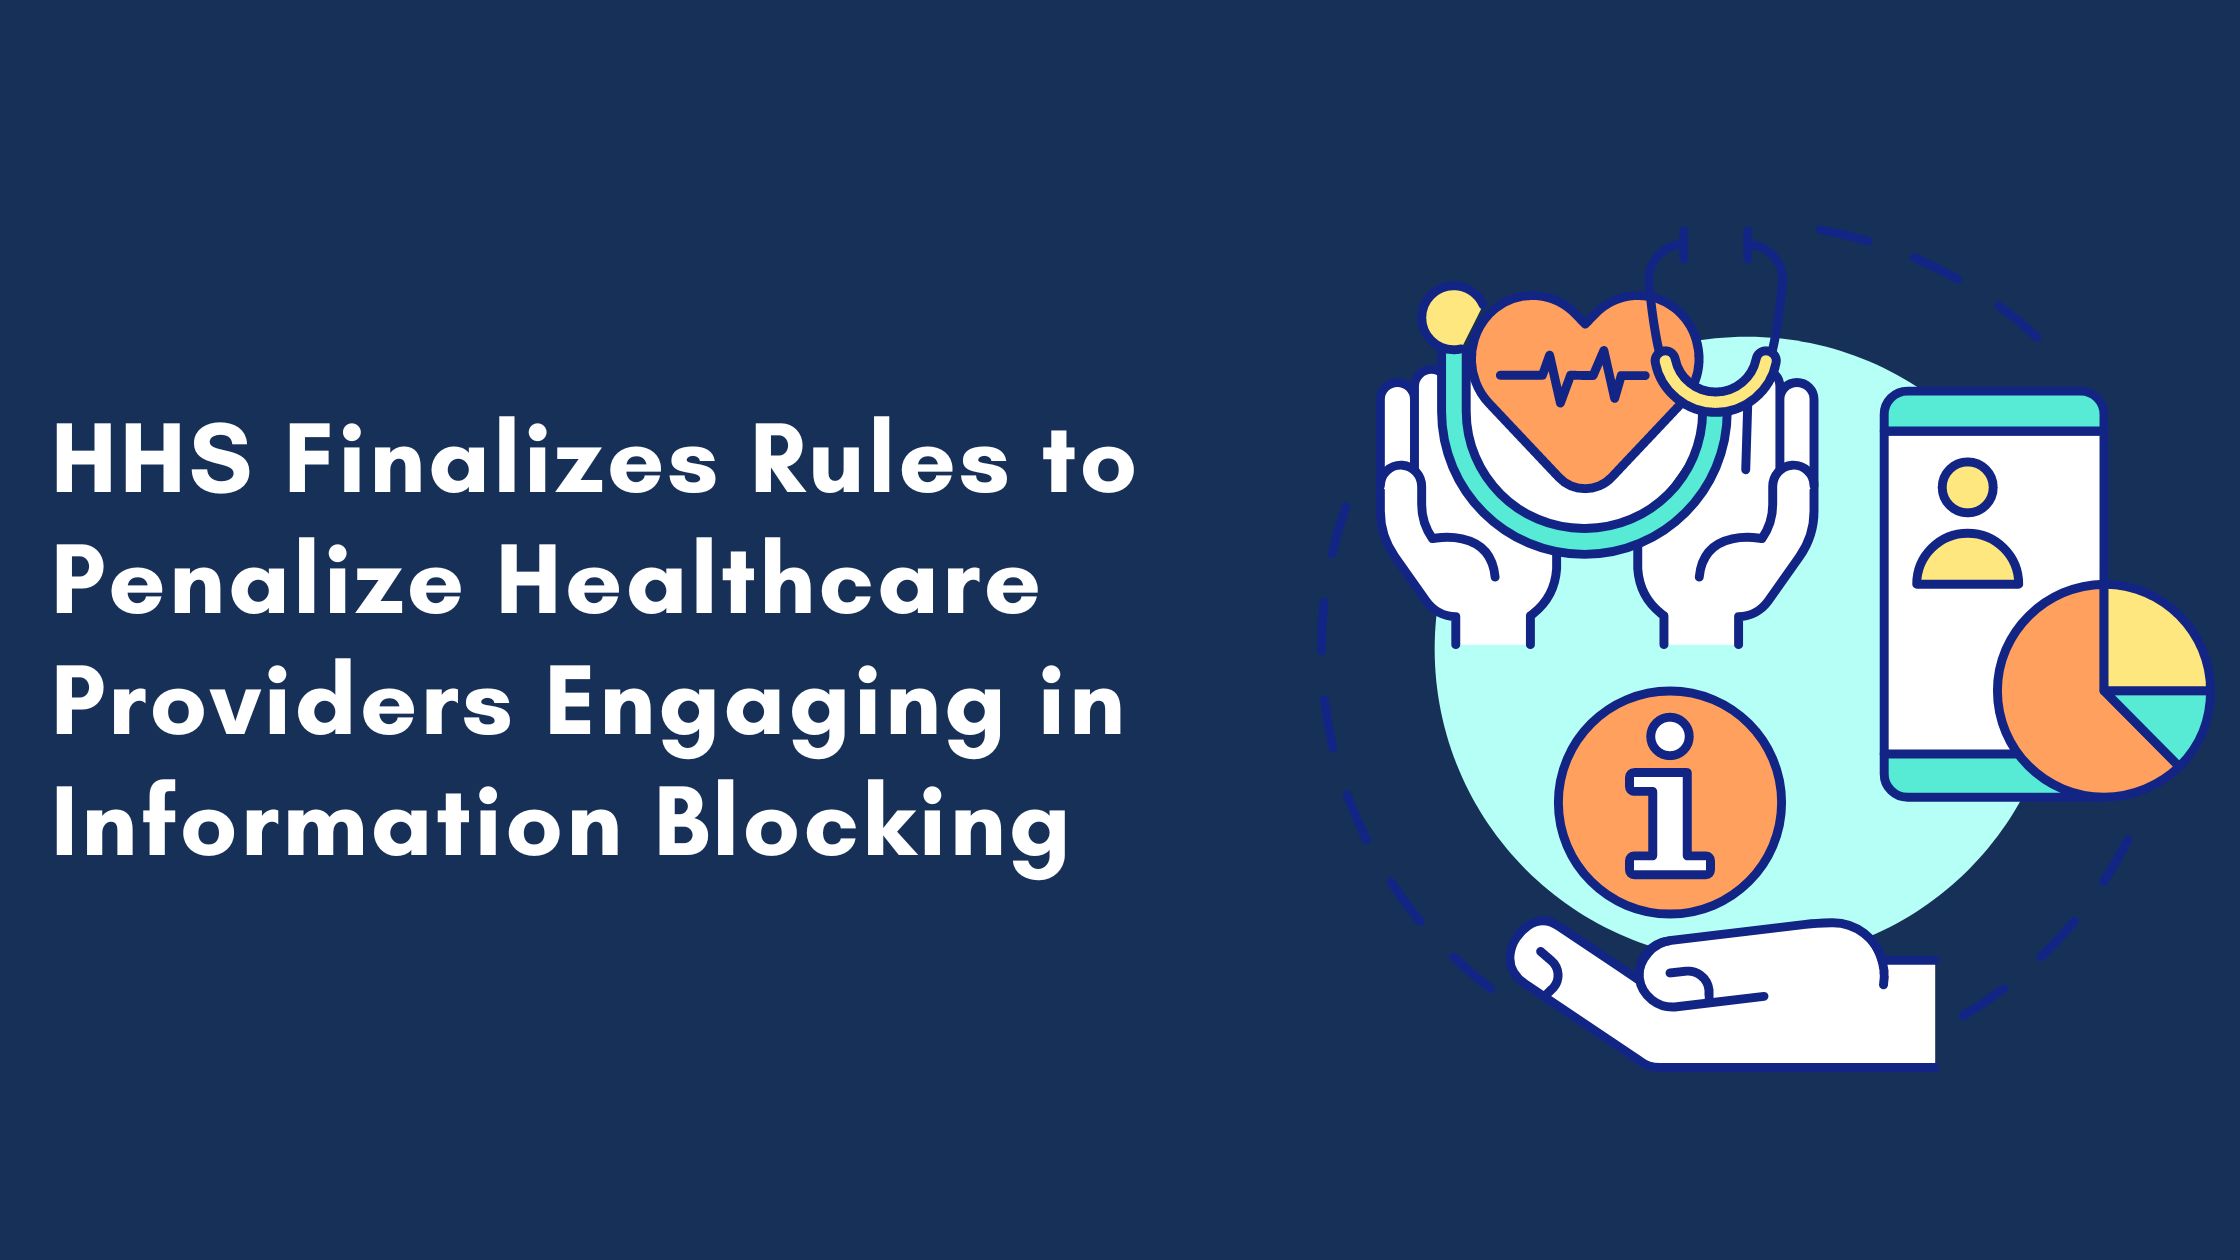 HHS Finalizes Rules to Penalize Healthcare Providers Engaging in Information Blocking